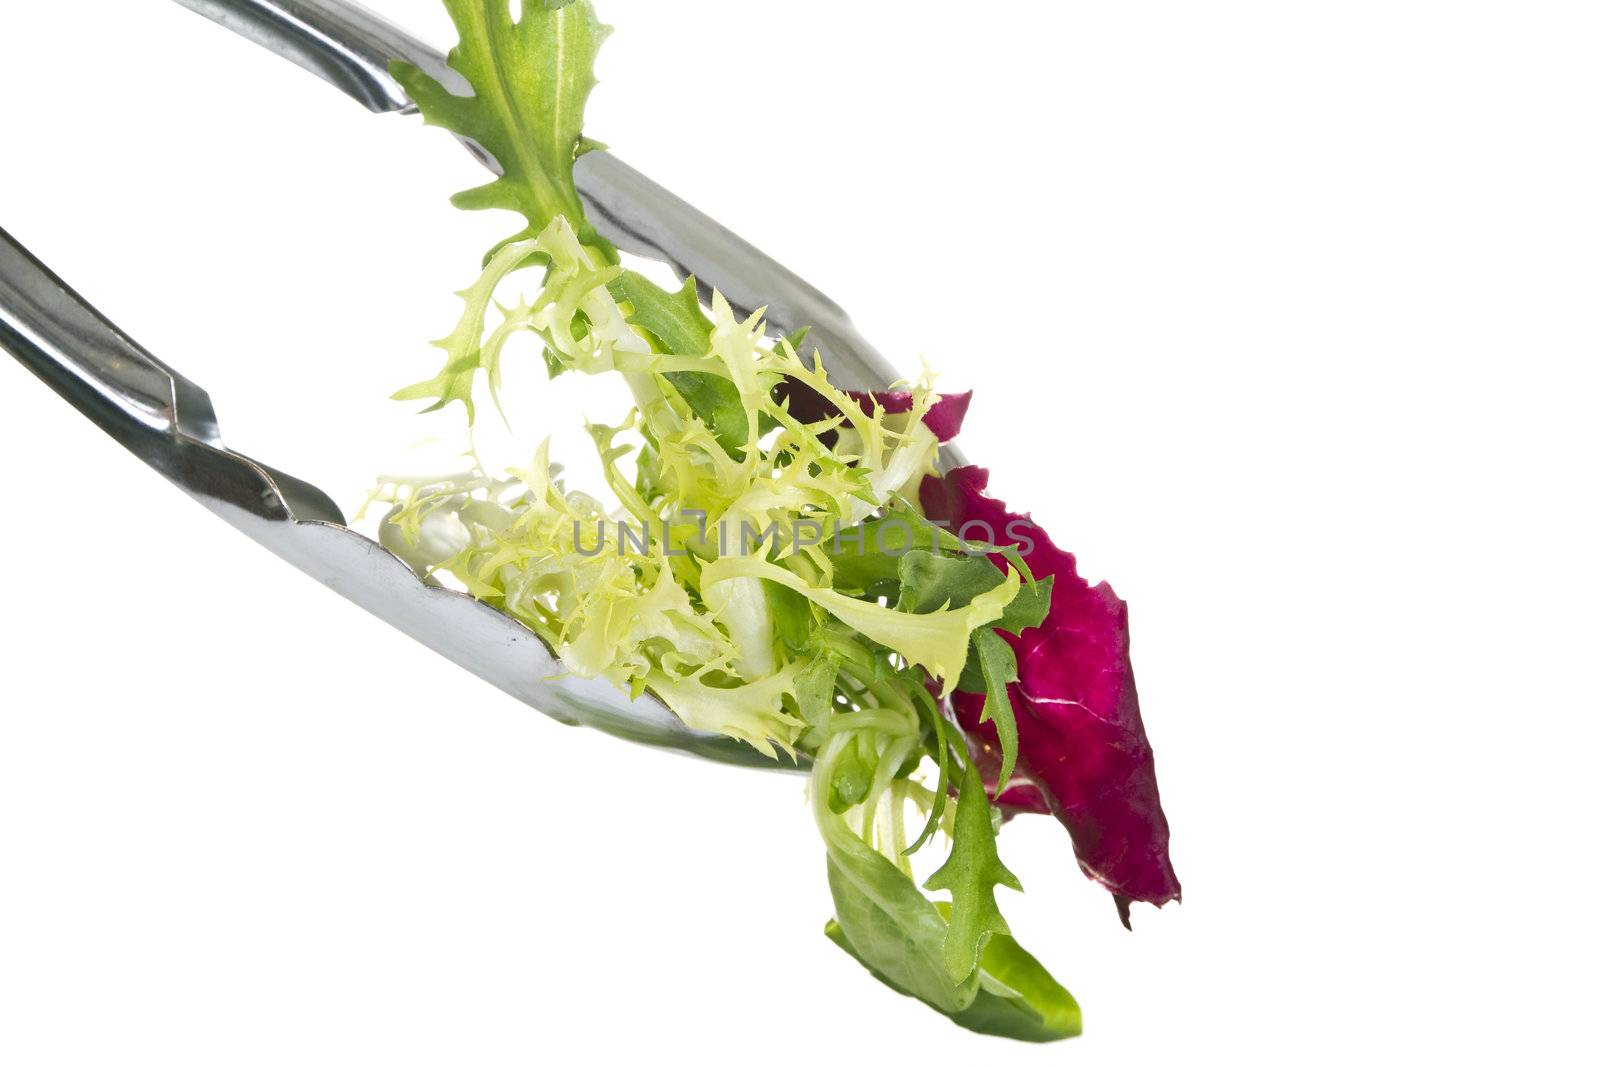 Tongs with salad leaves by caldix